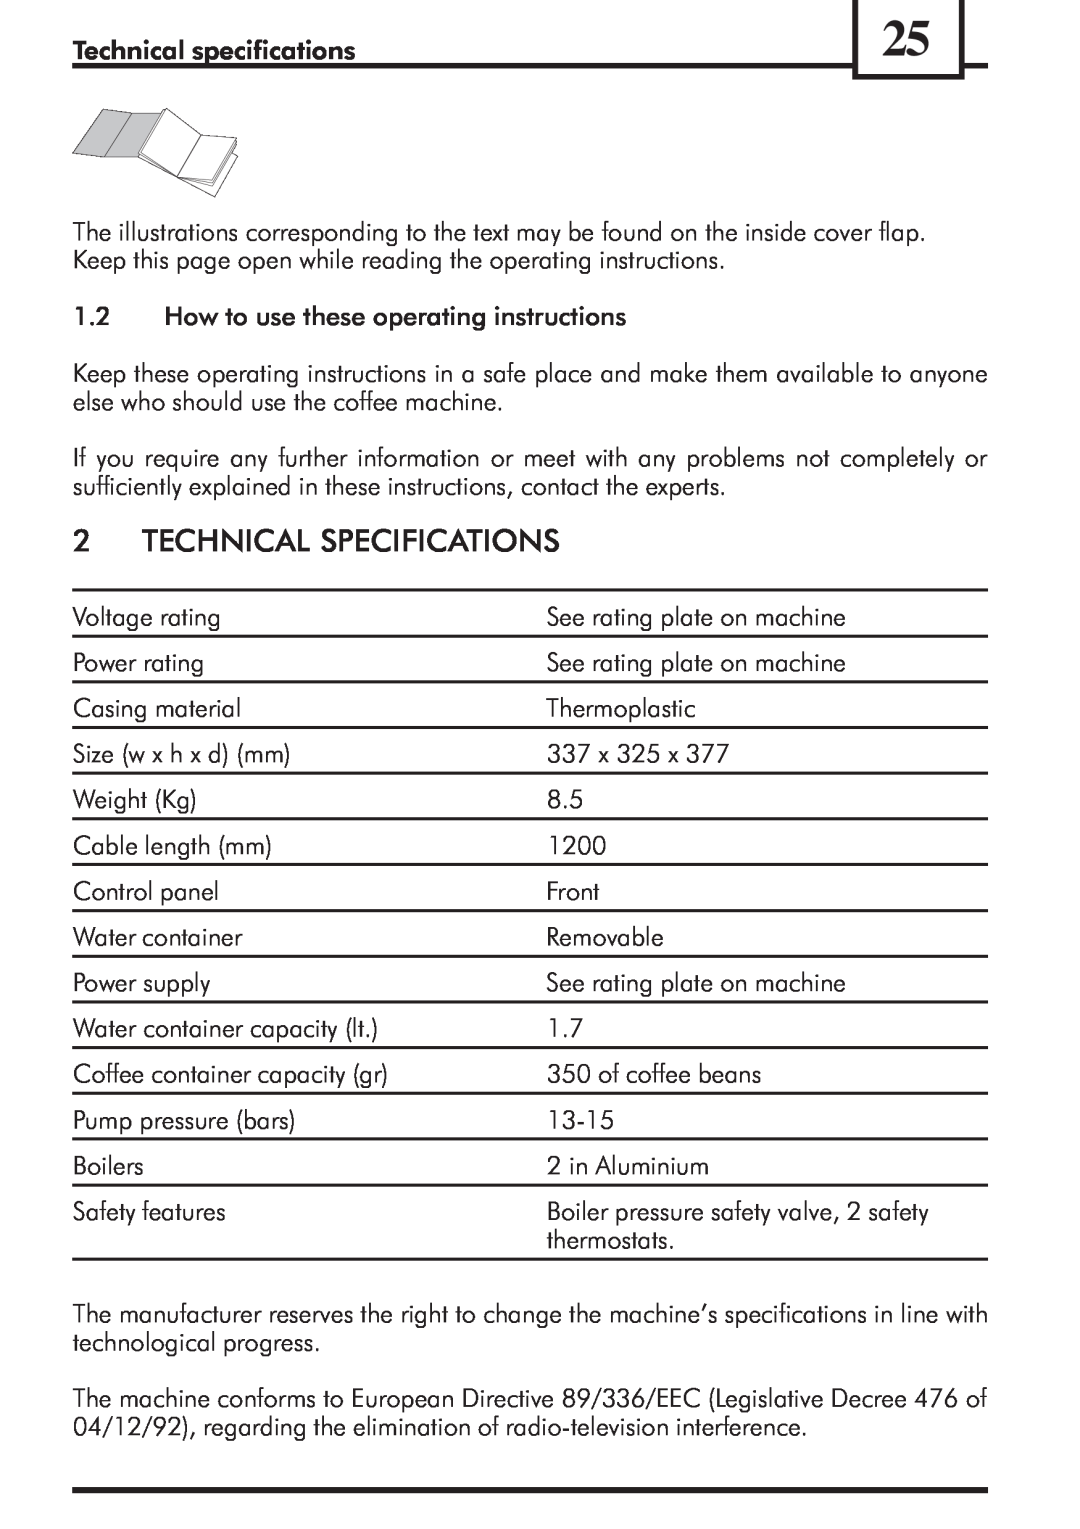 Saeco Coffee Makers VIENNADELUXE manual 2TECHNICAL SPECIFICATIONS 